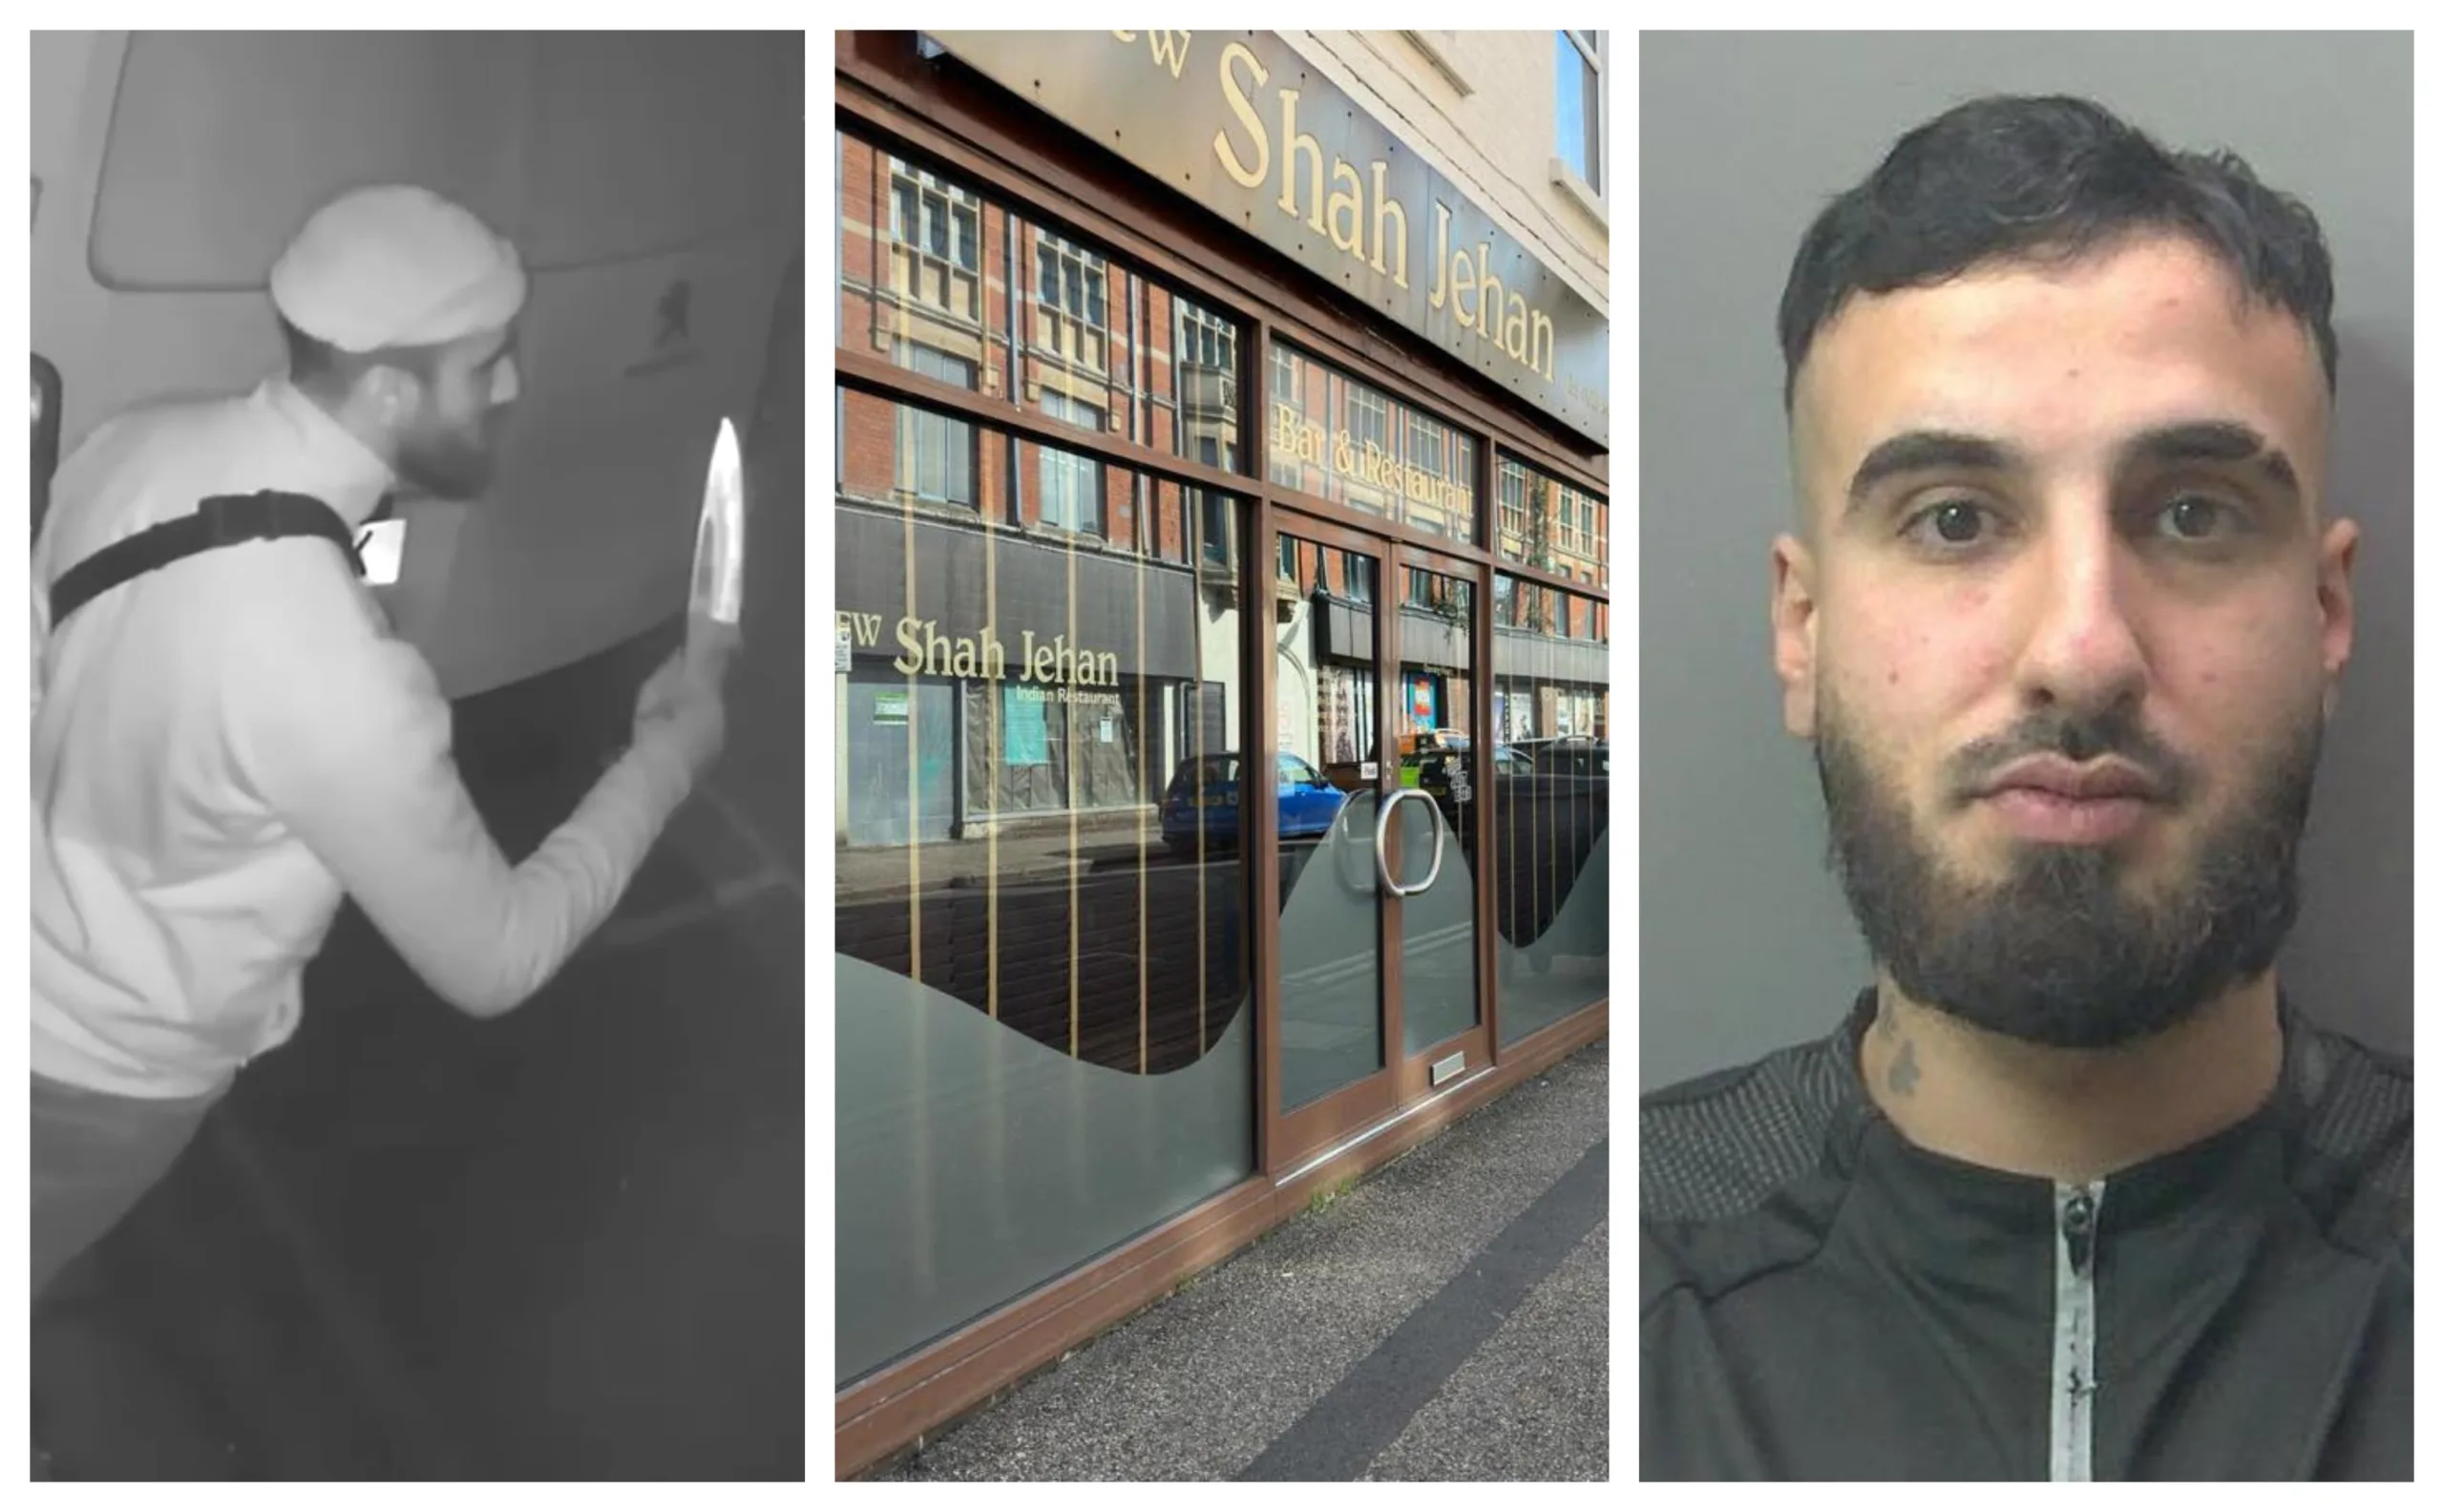 Mohammed Jamal Qadeer, 28, was inside the Shah Jehan restaurant at about 4am on 20 February with a group of six other men when a fight broke out between them. Armed with a knife, Qadeer attacked a man in his 30s who was trying to leave the restaurant, stabbing him in the back and leaving him with an arterial bleed.